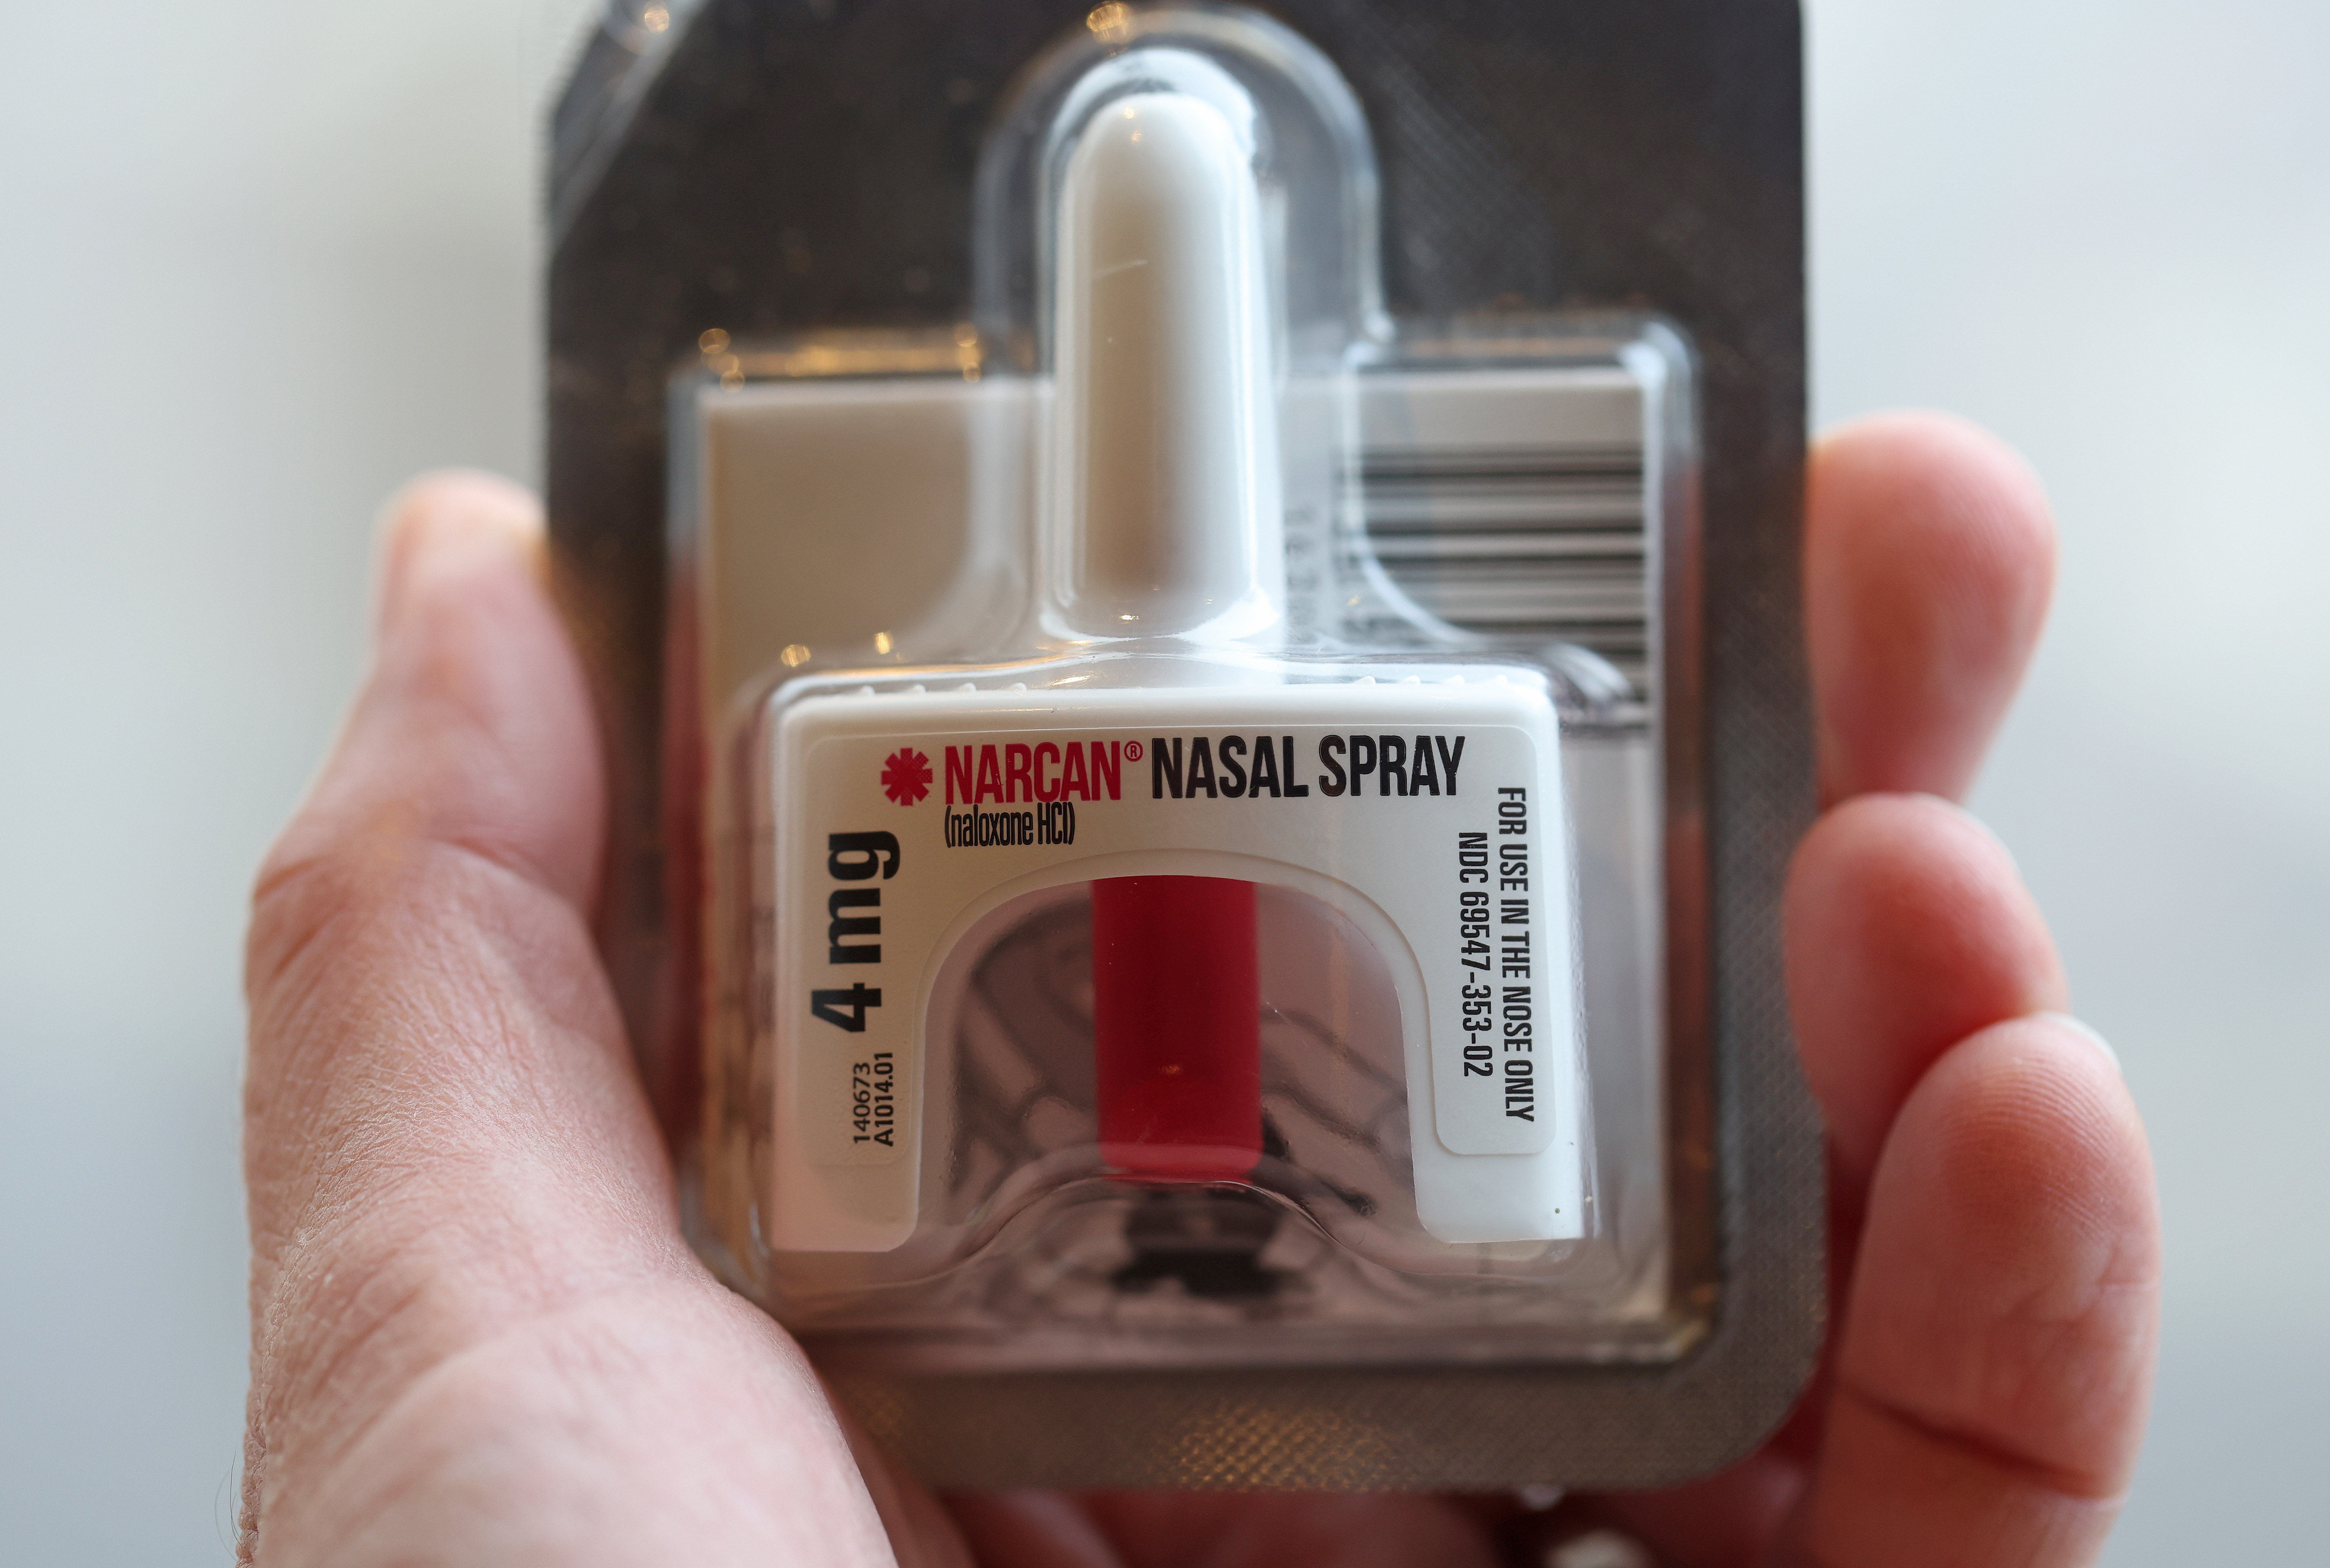 A photo of a hand holding the small cartridge of Narcan nasal spray.